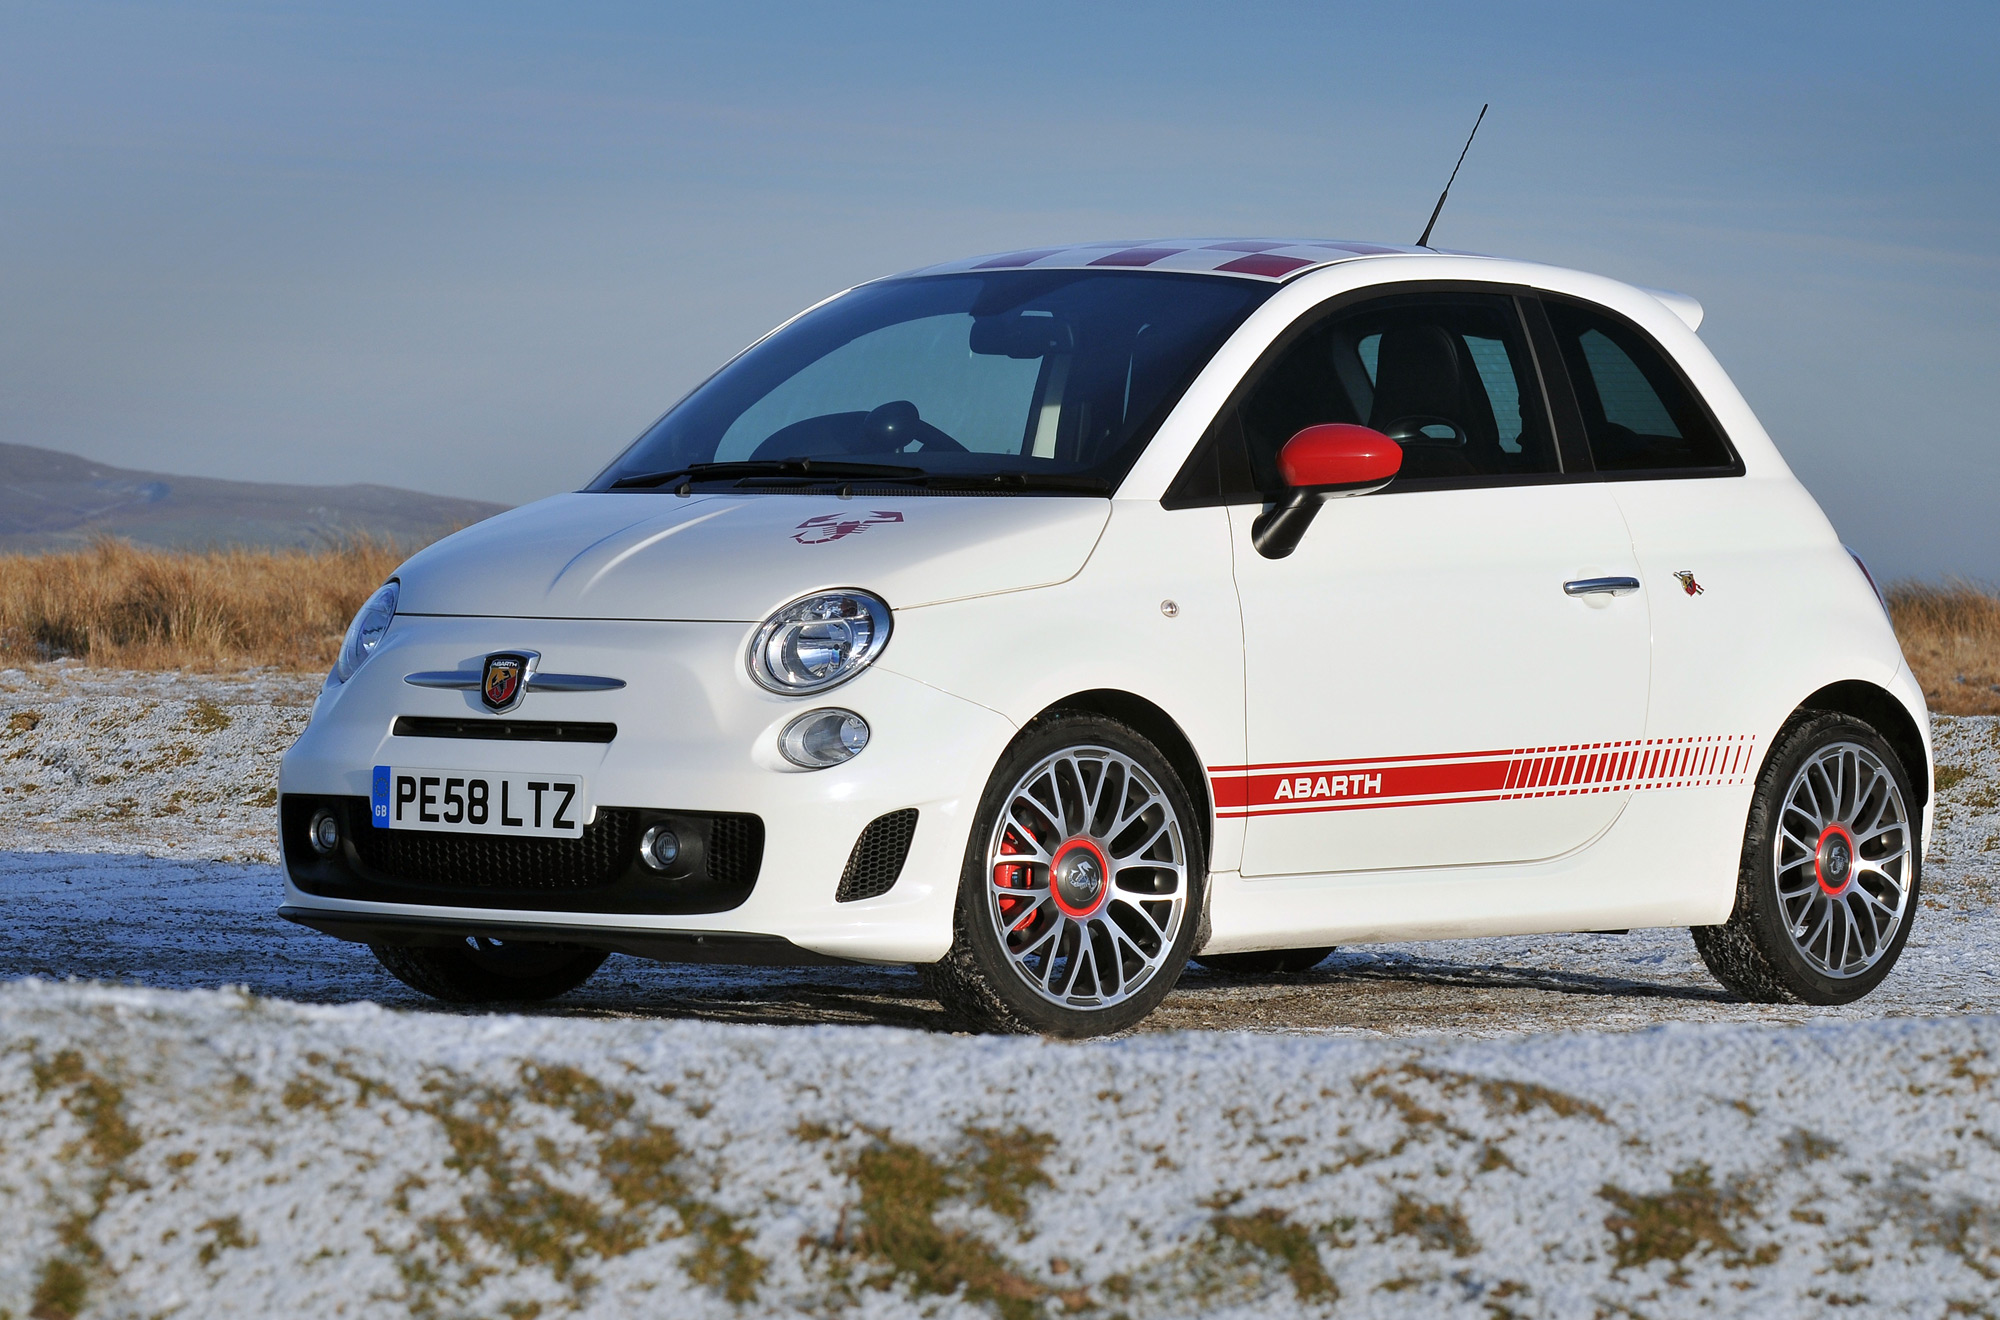 Fiat Abarth Backgrounds, Compatible - PC, Mobile, Gadgets| 2000x1320 px